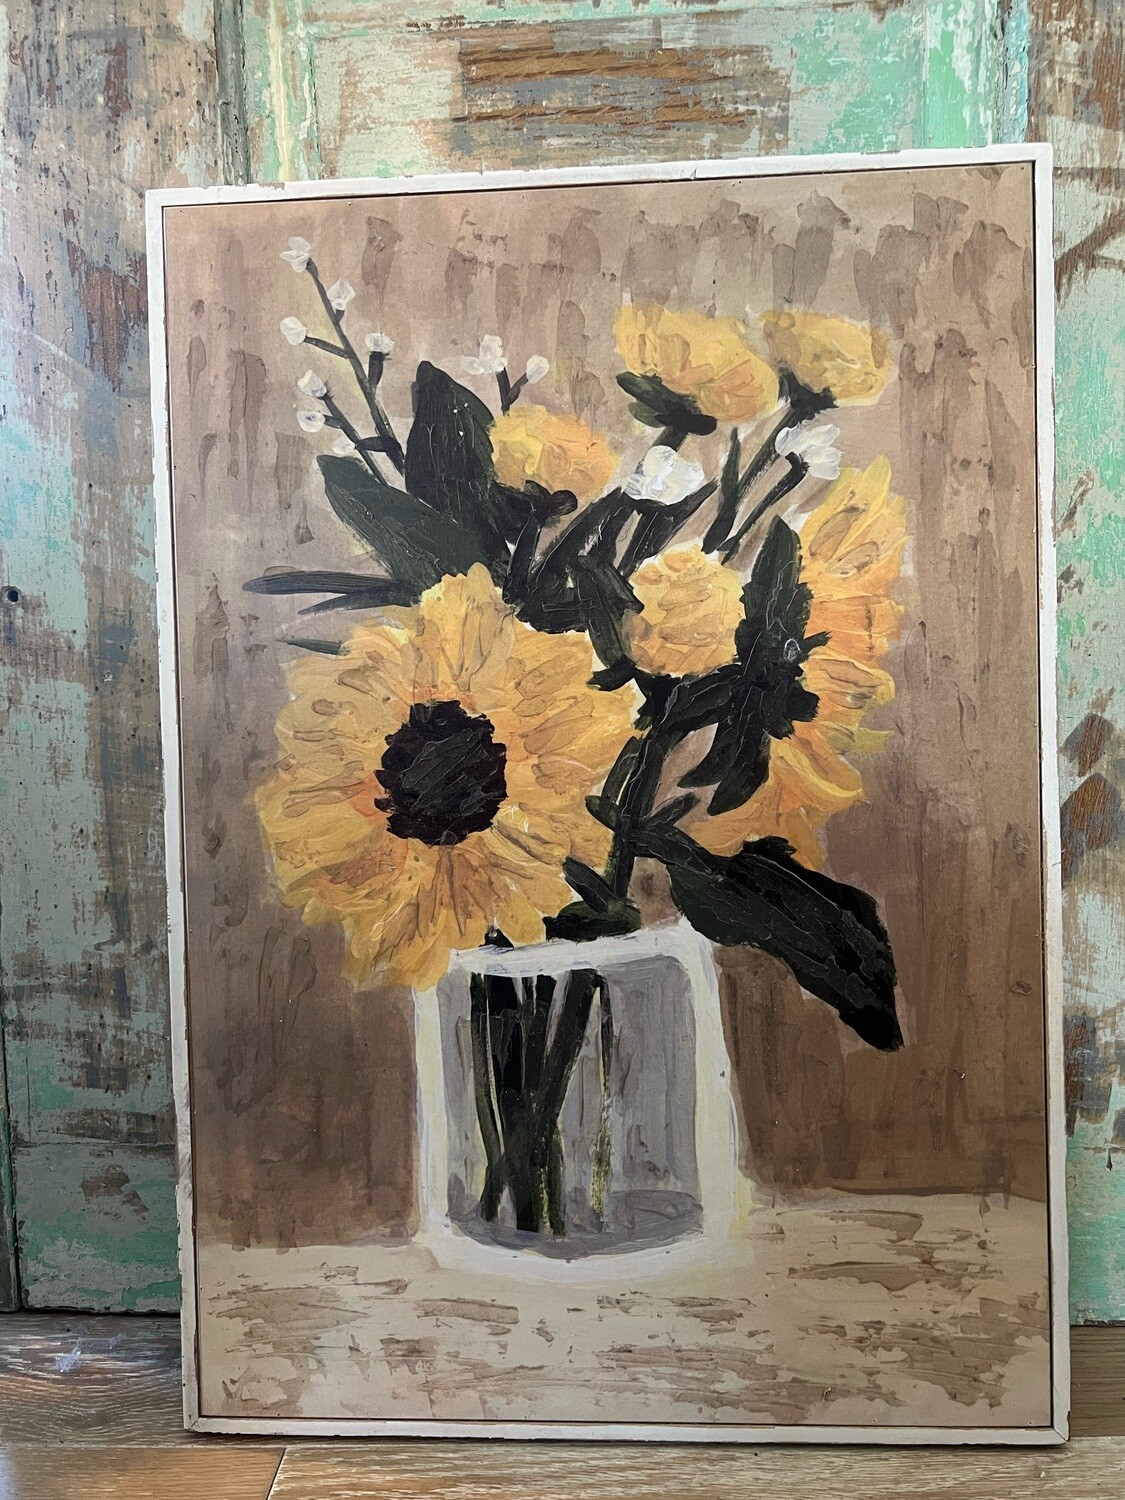 Sunflower Abstract Painting